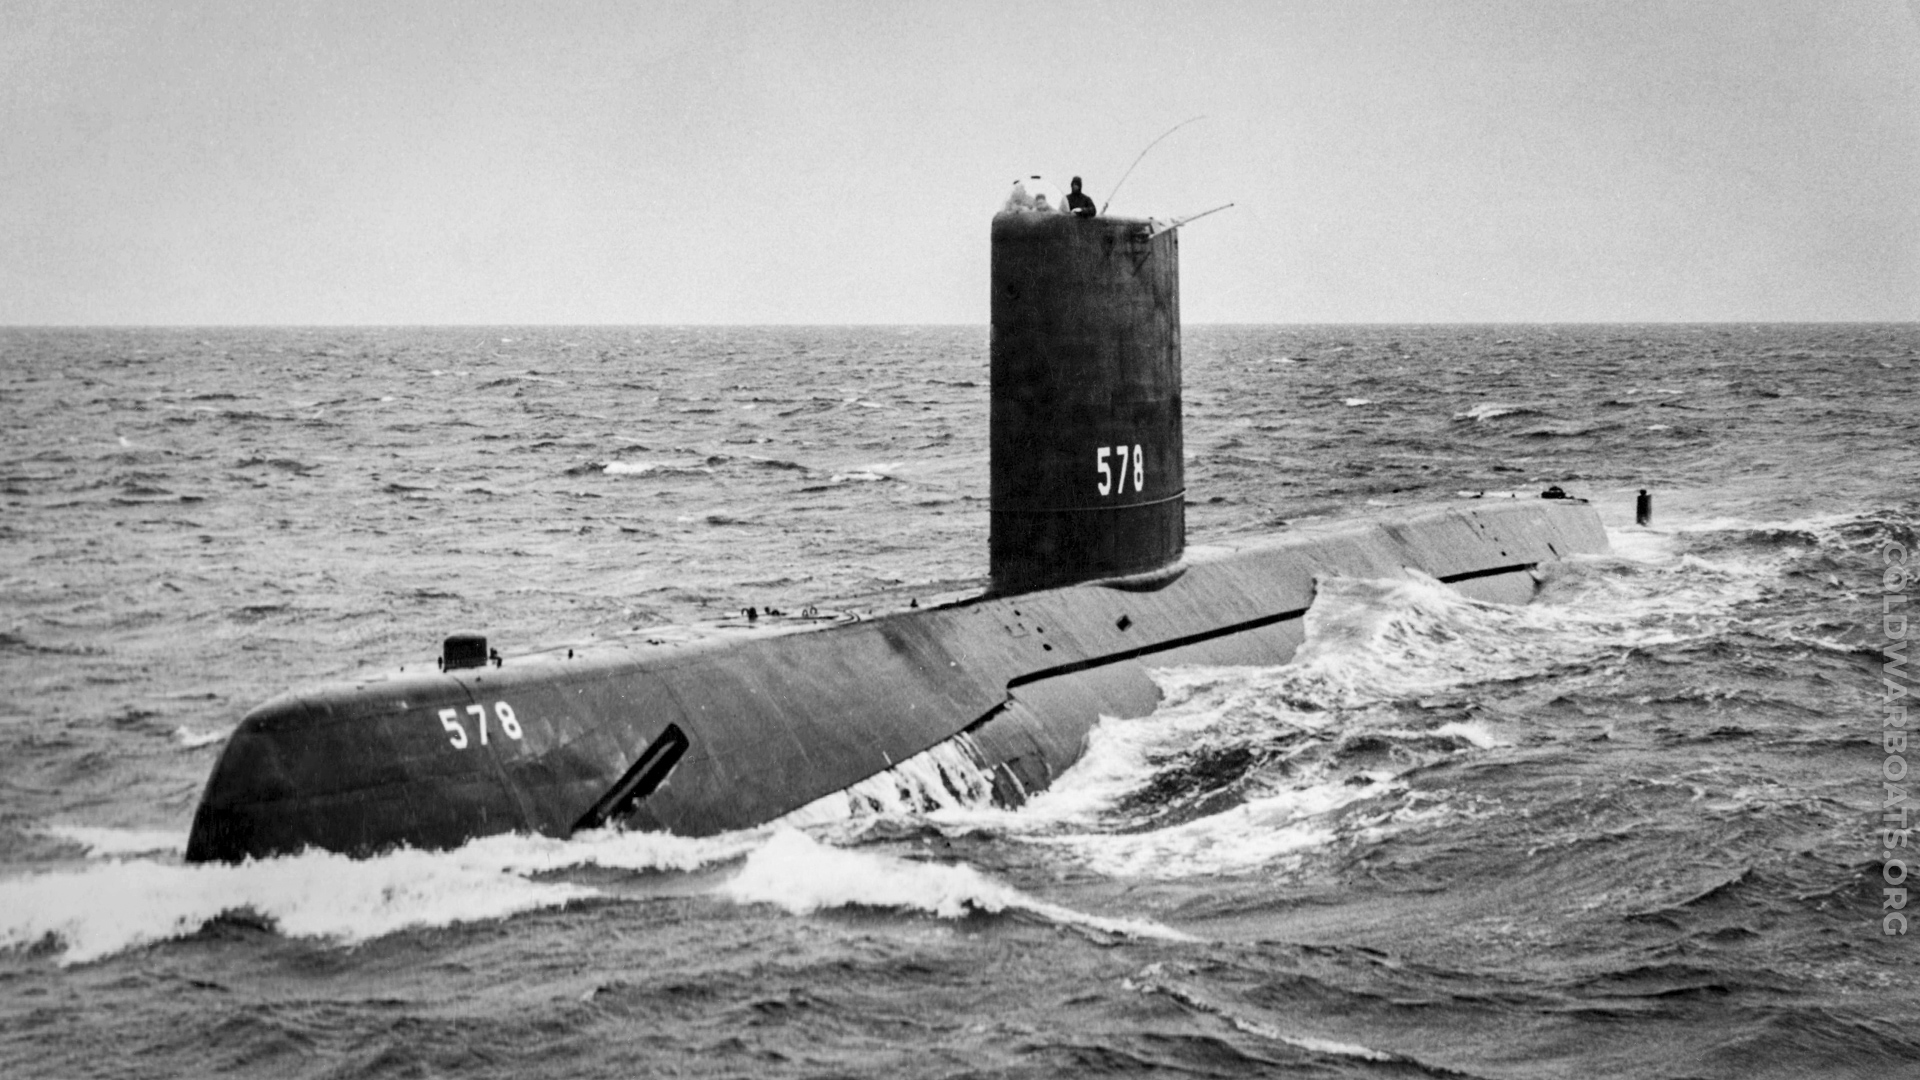 Sea Trials Run #1 finds USS SKATE (SSN 578) making three knots on the surface out of Groton, CT.